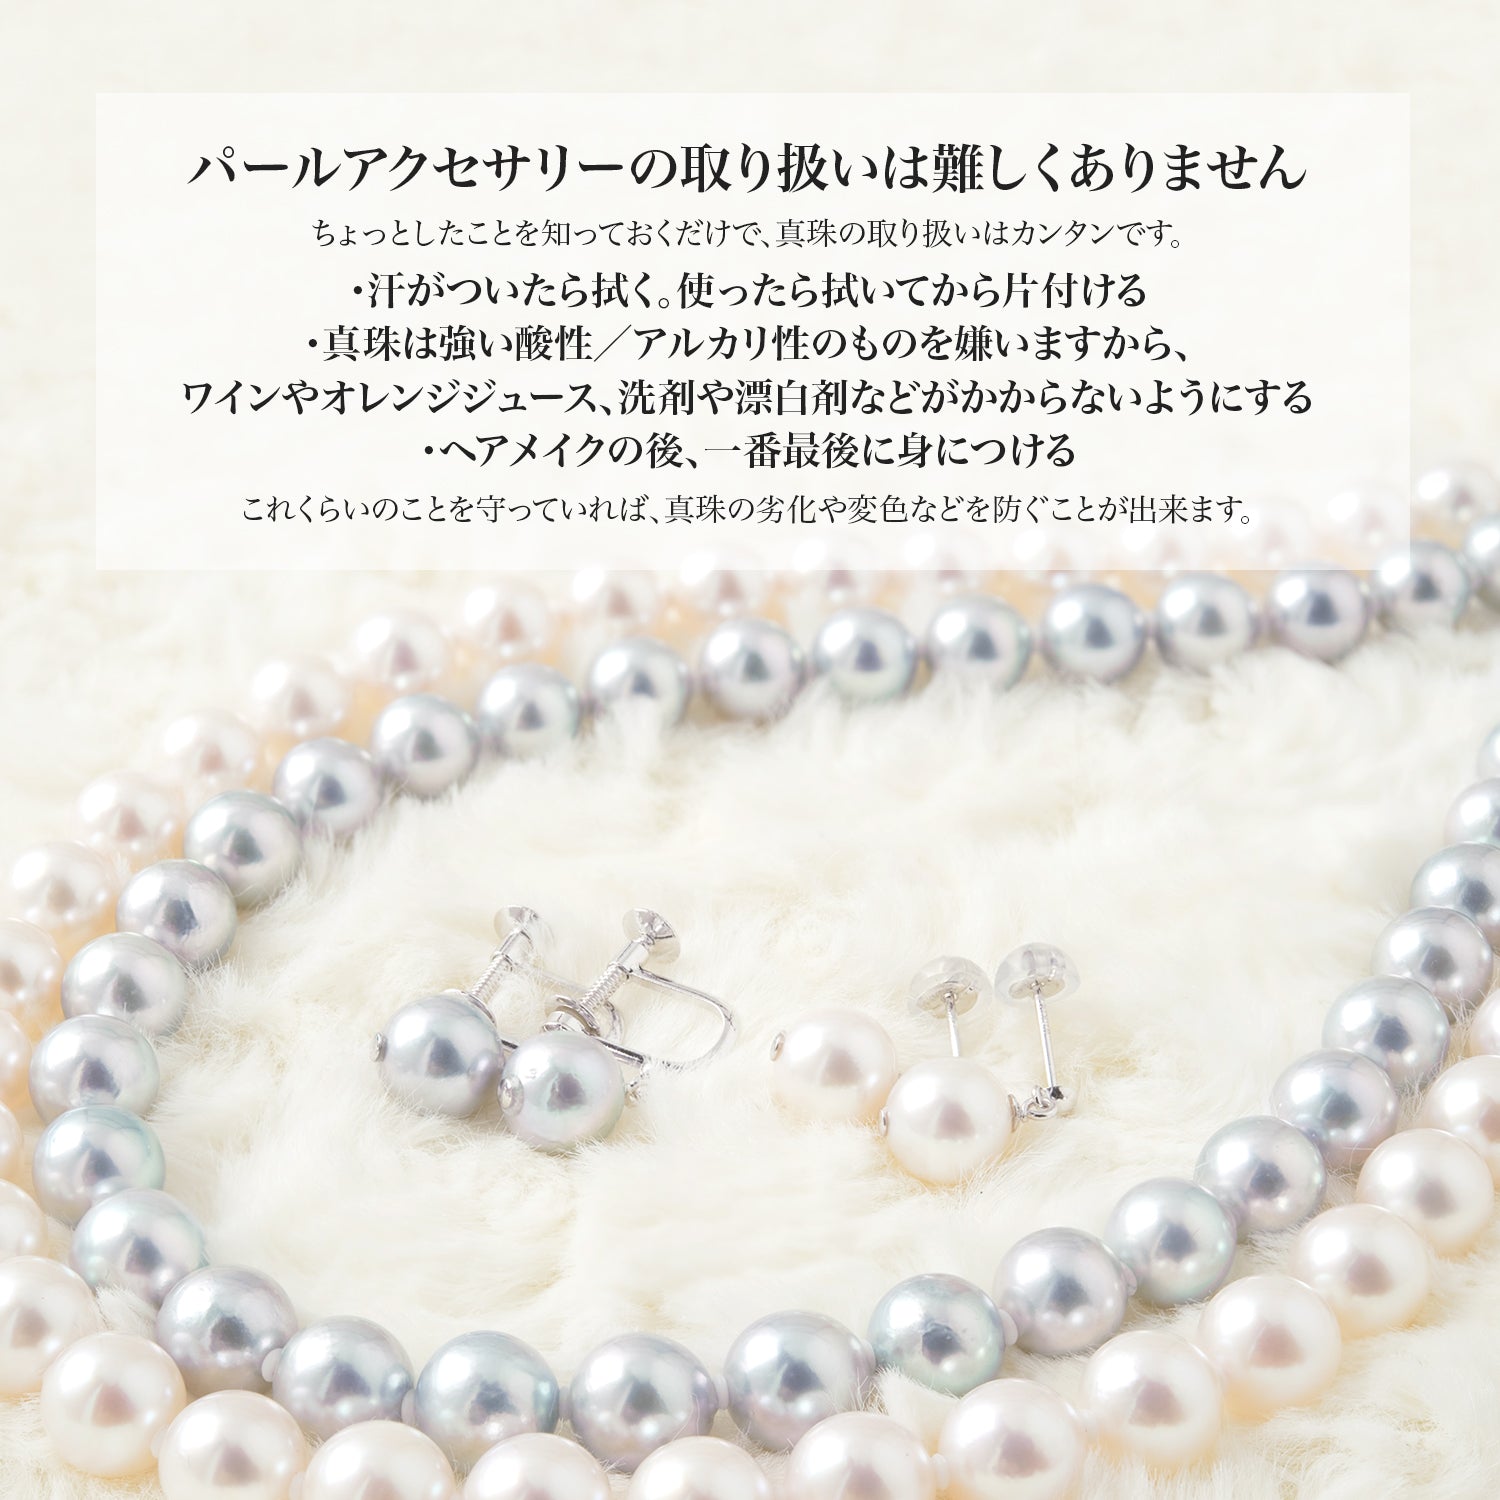 [Natural White] Uncolored Akoya Pearl Formal Necklace Set of 2 [7.5-8.0mm] (Earrings/Earrings) Certificate of Authenticity Storage Case Included Ceremonies